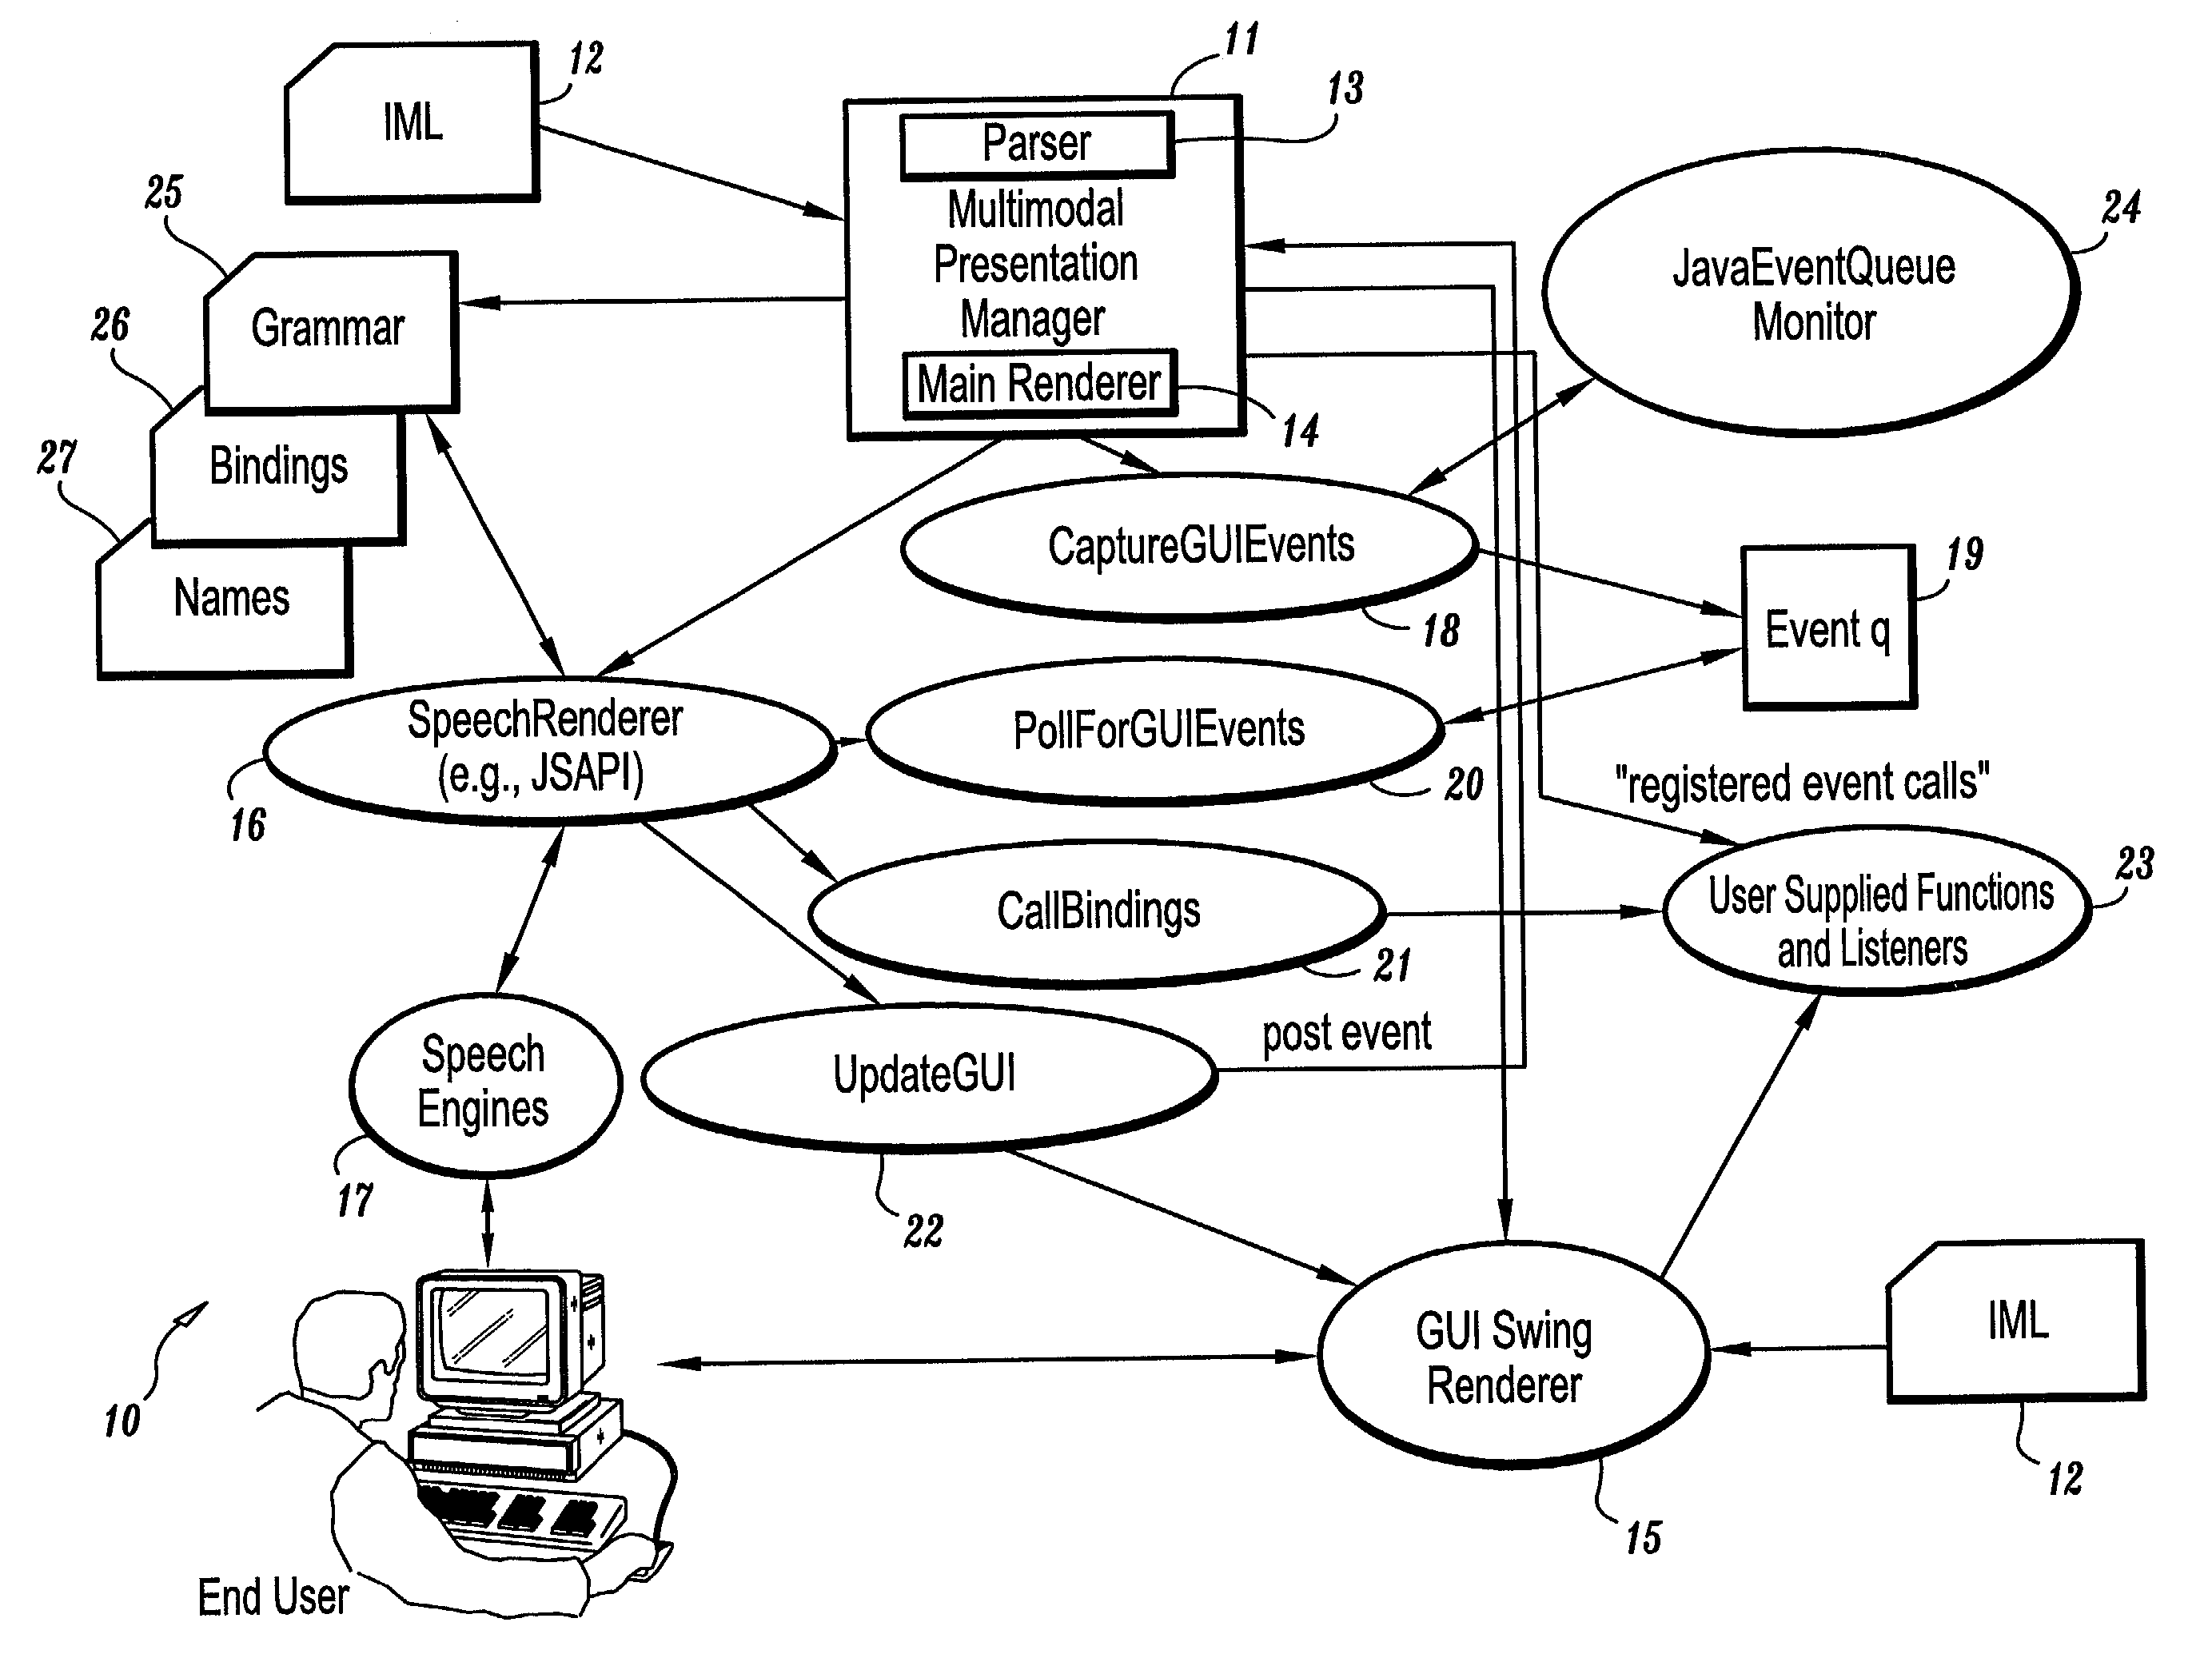 System and method for generating and presenting multi-modal applications from intent-based markup scripts